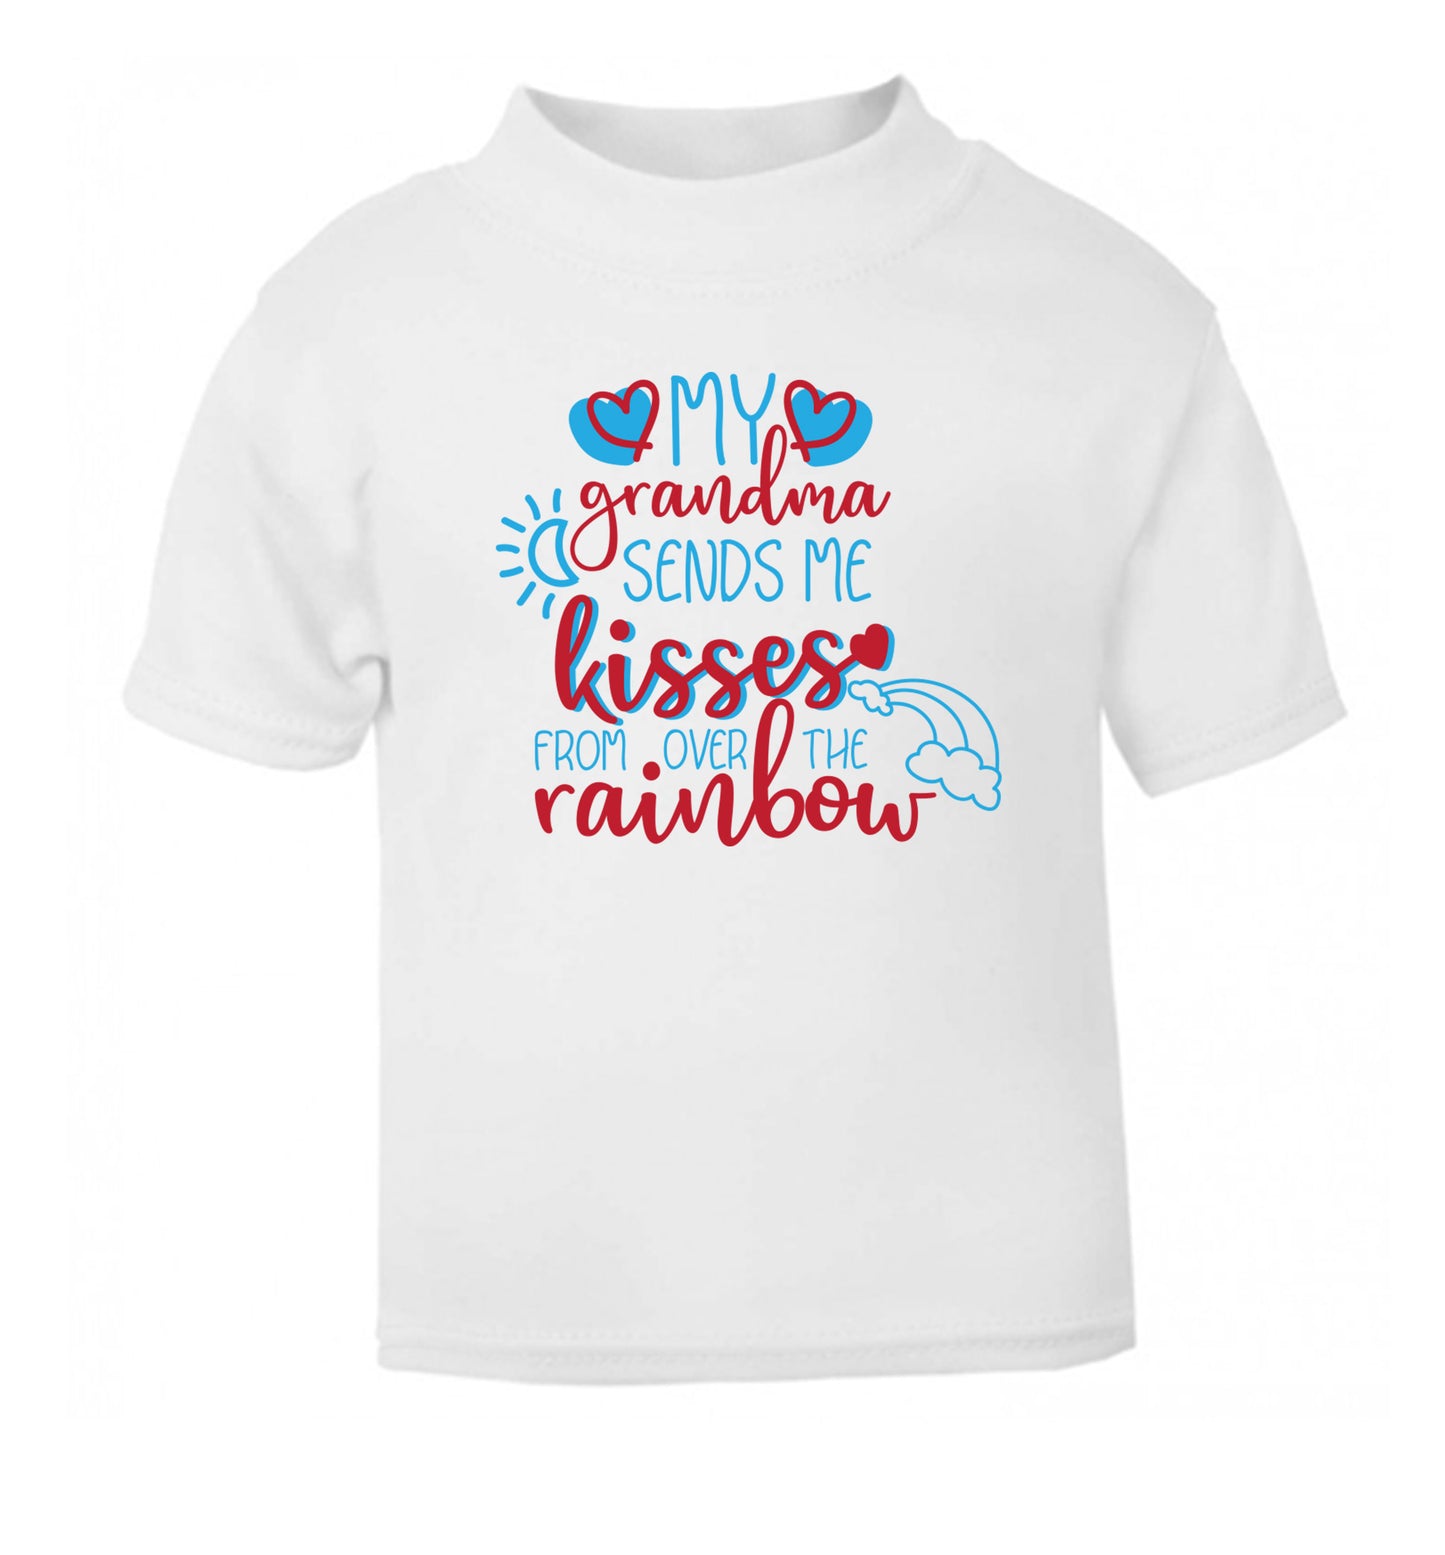 My grandma sends me kisses from over the rainbow white Baby Toddler Tshirt 2 Years